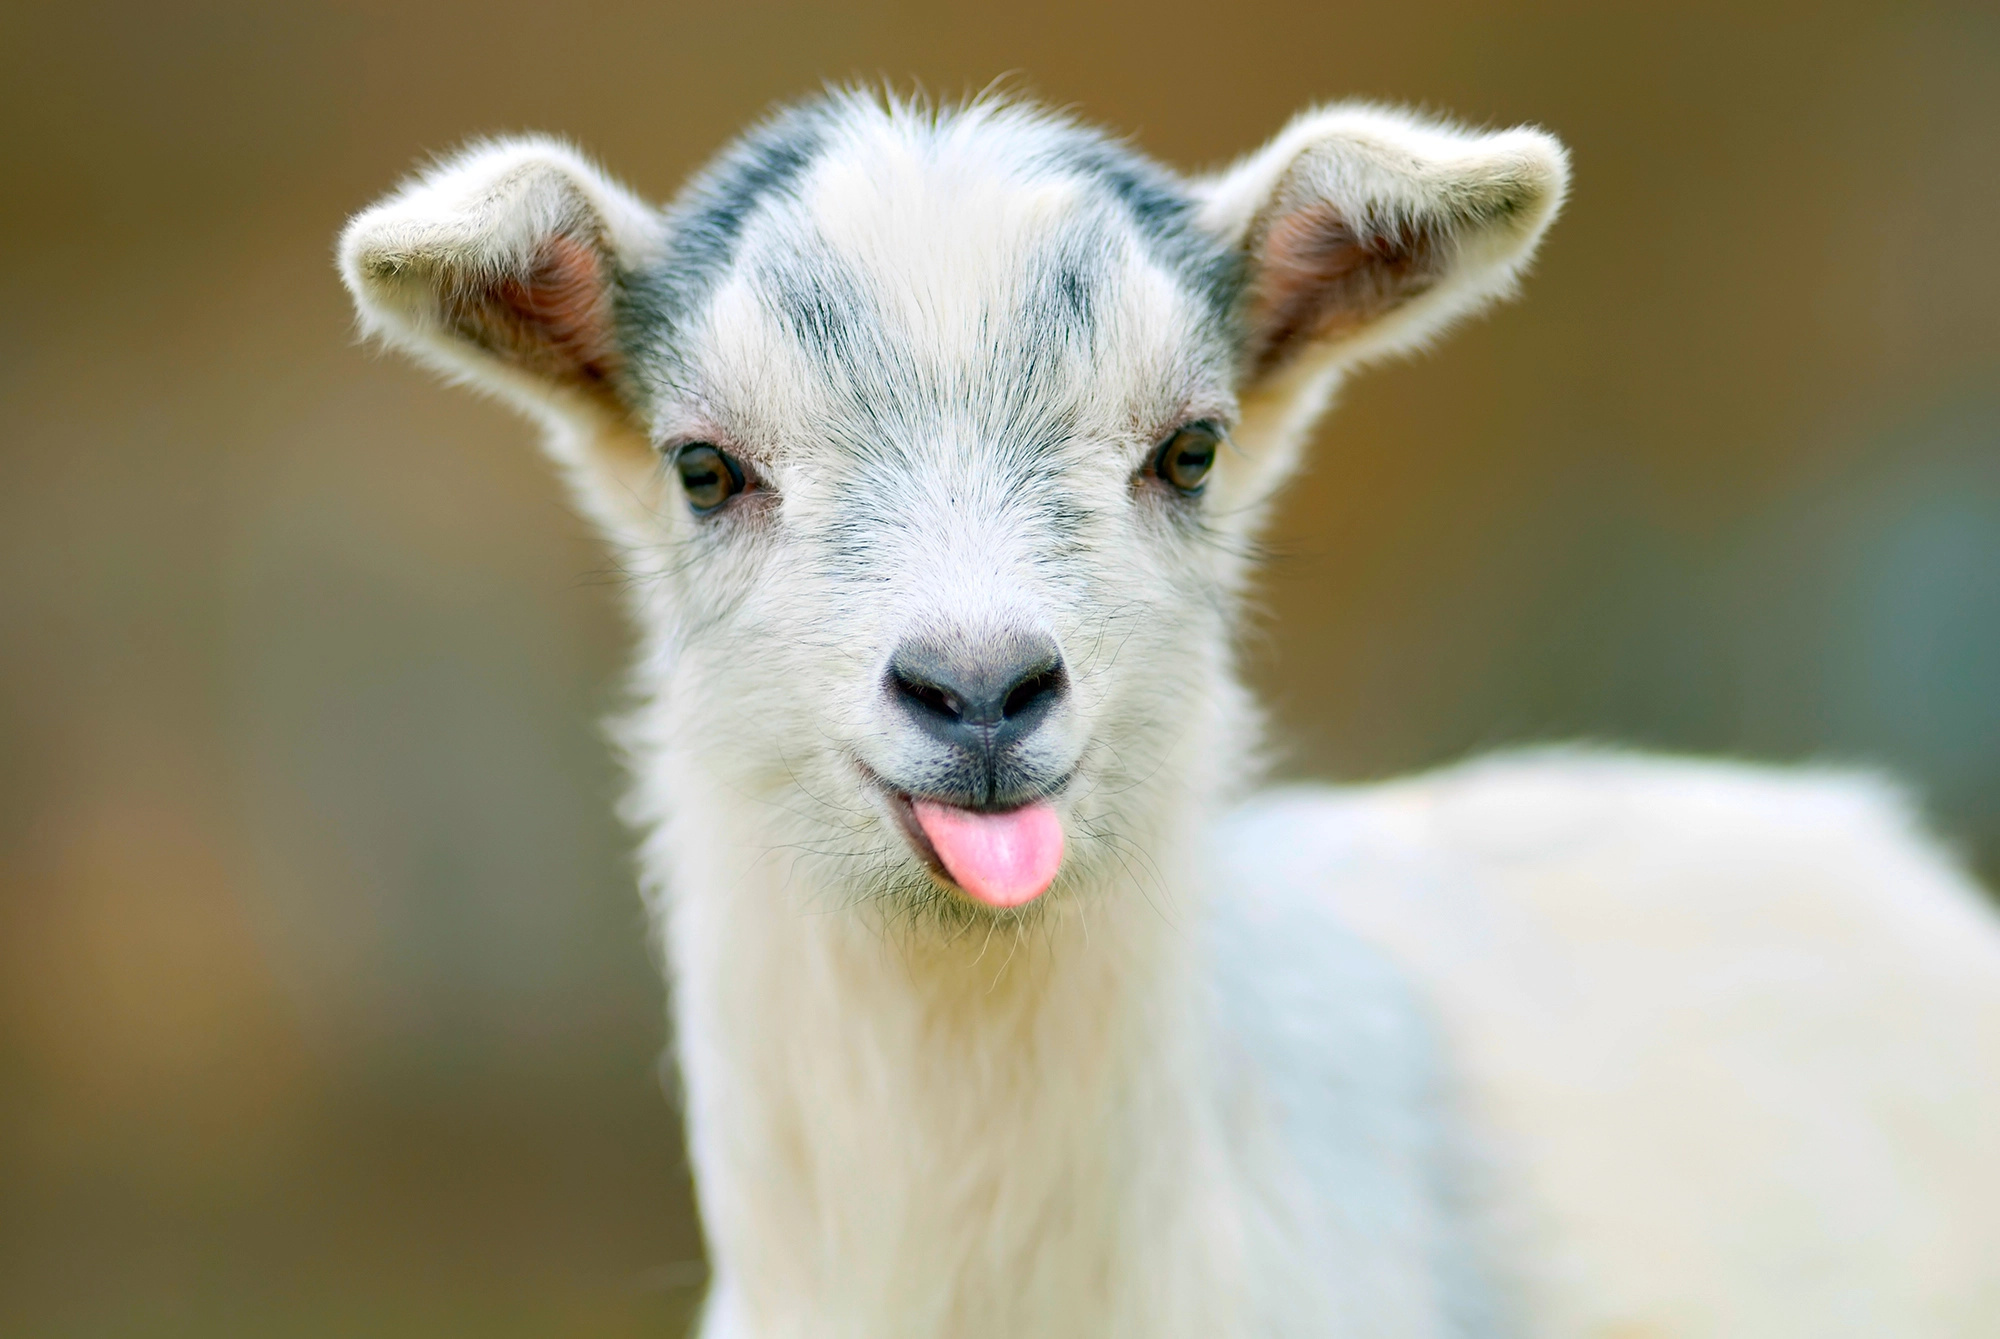 Airline goat ban, Flying with goats, Travel restrictions for goats, Animals on planes, 2000x1340 HD Desktop